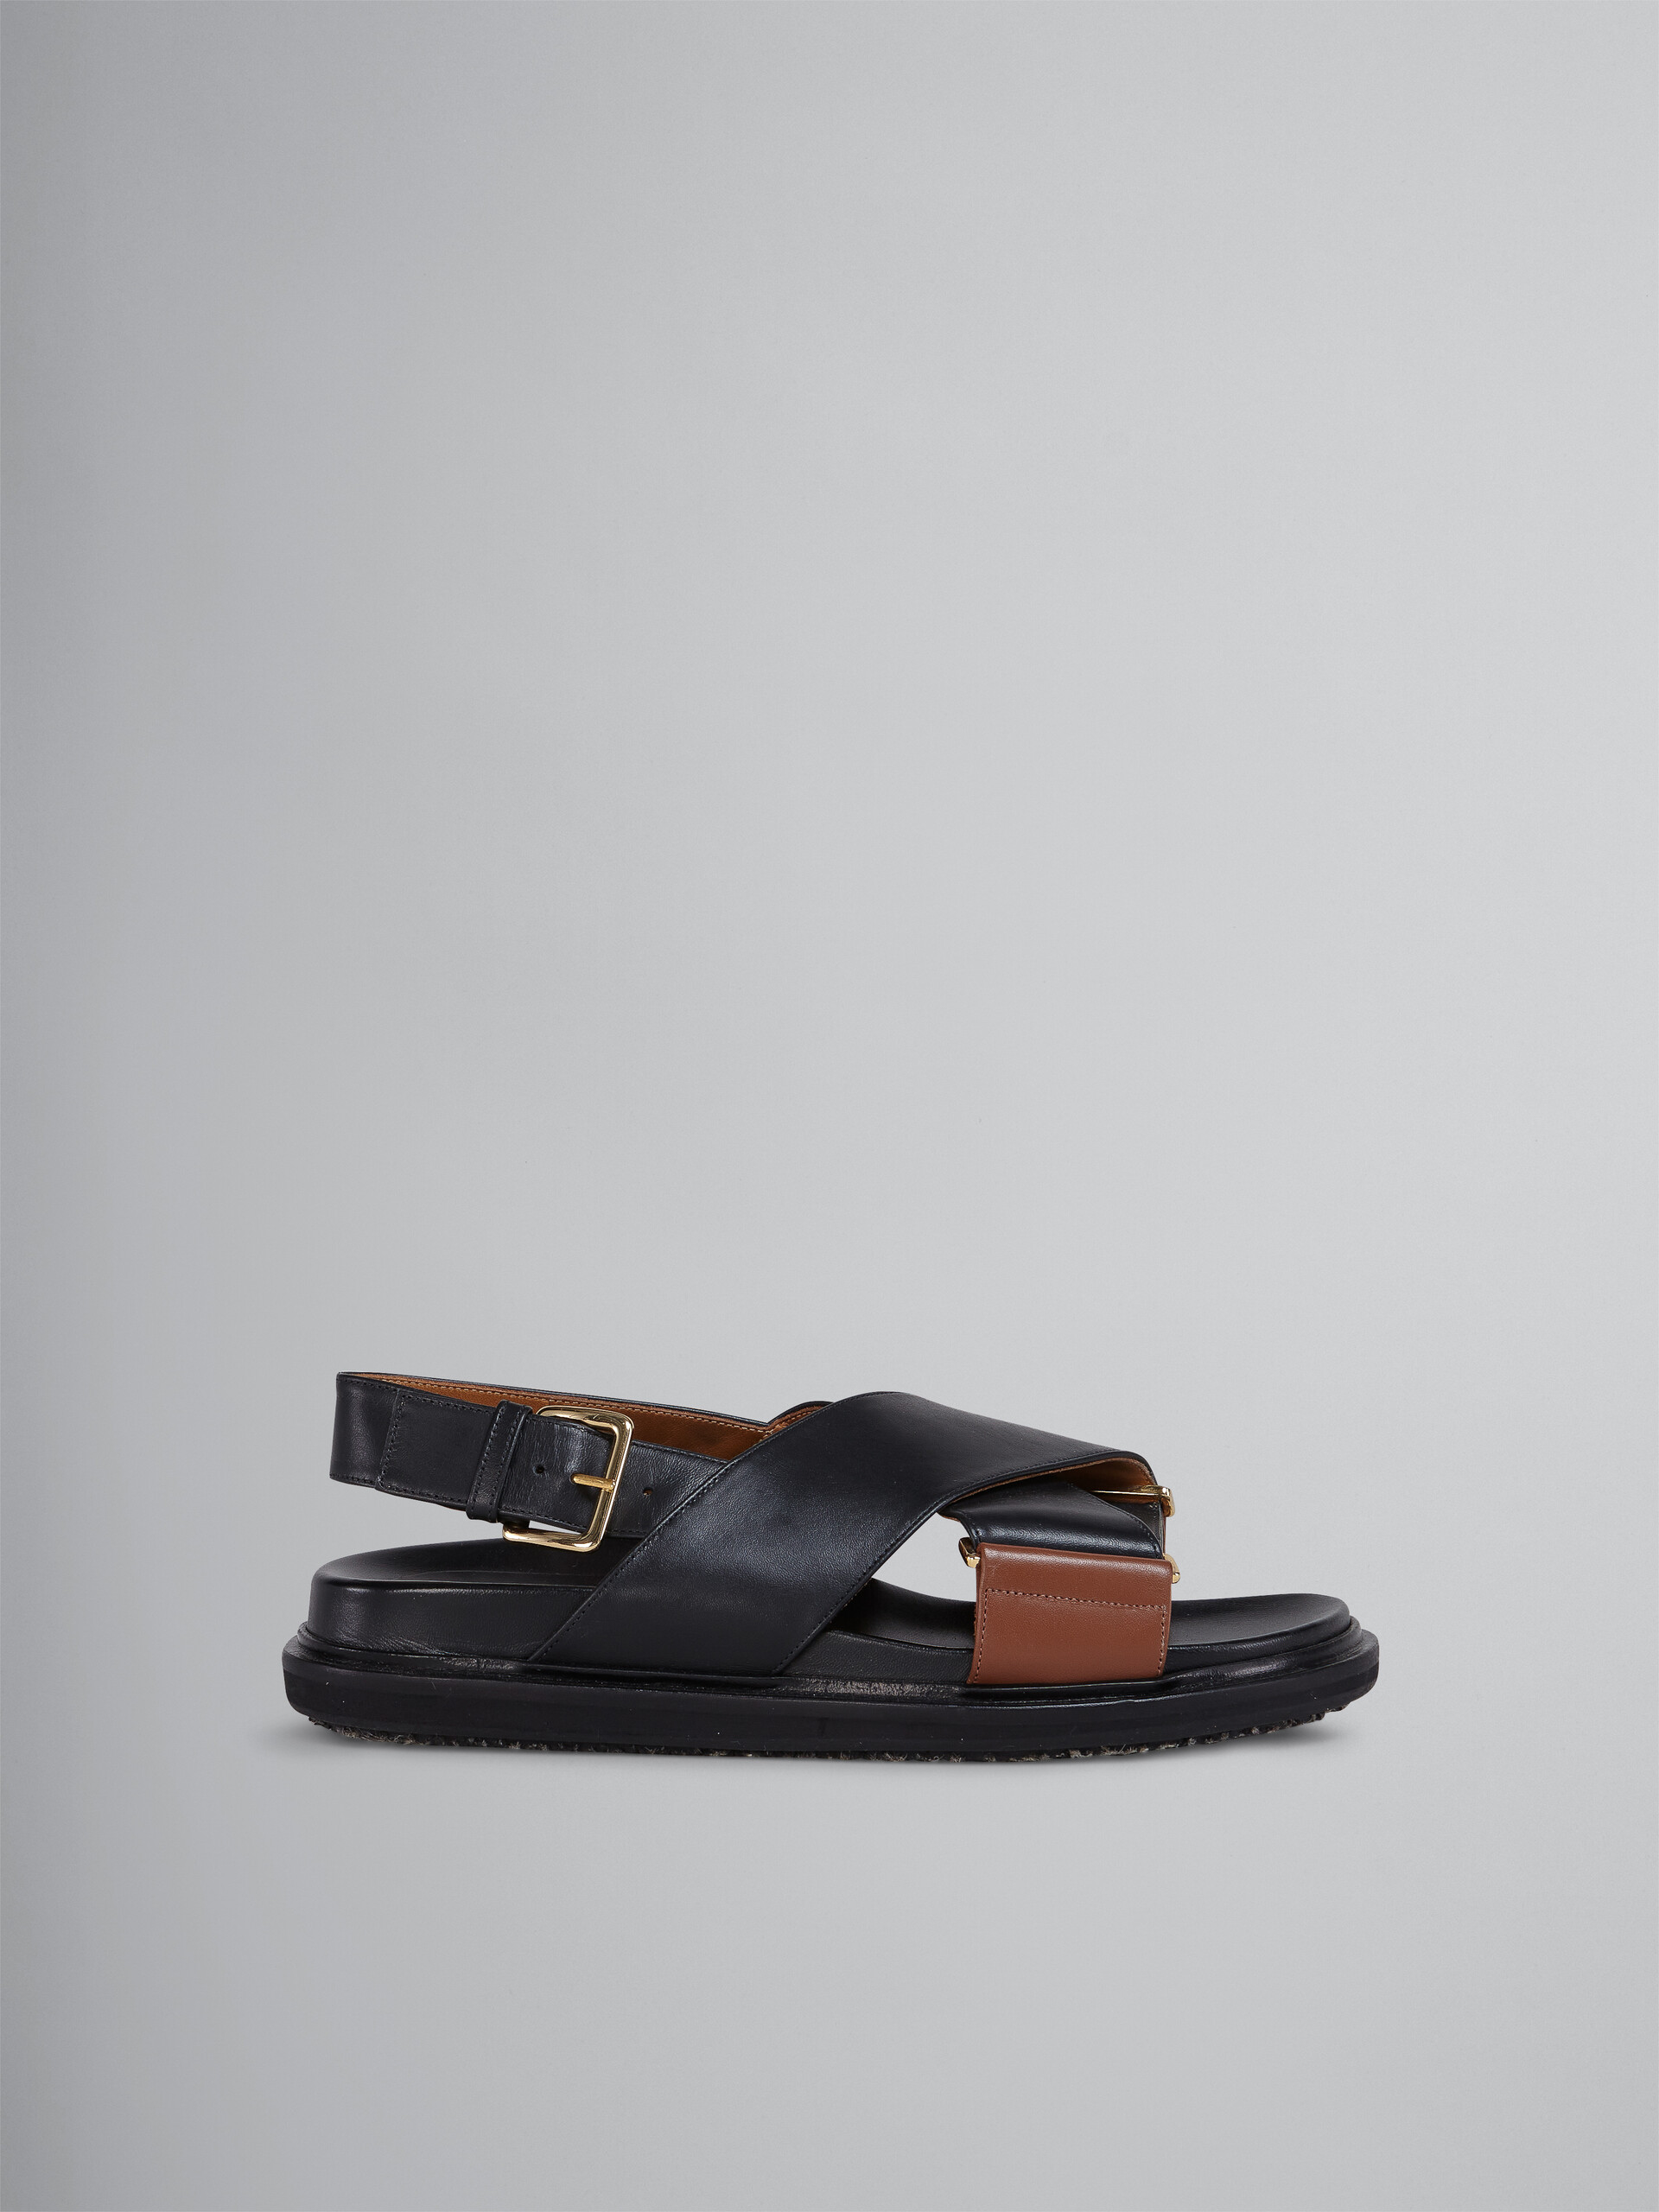 Black and brown leather Fussbett - Sandals - Image 1